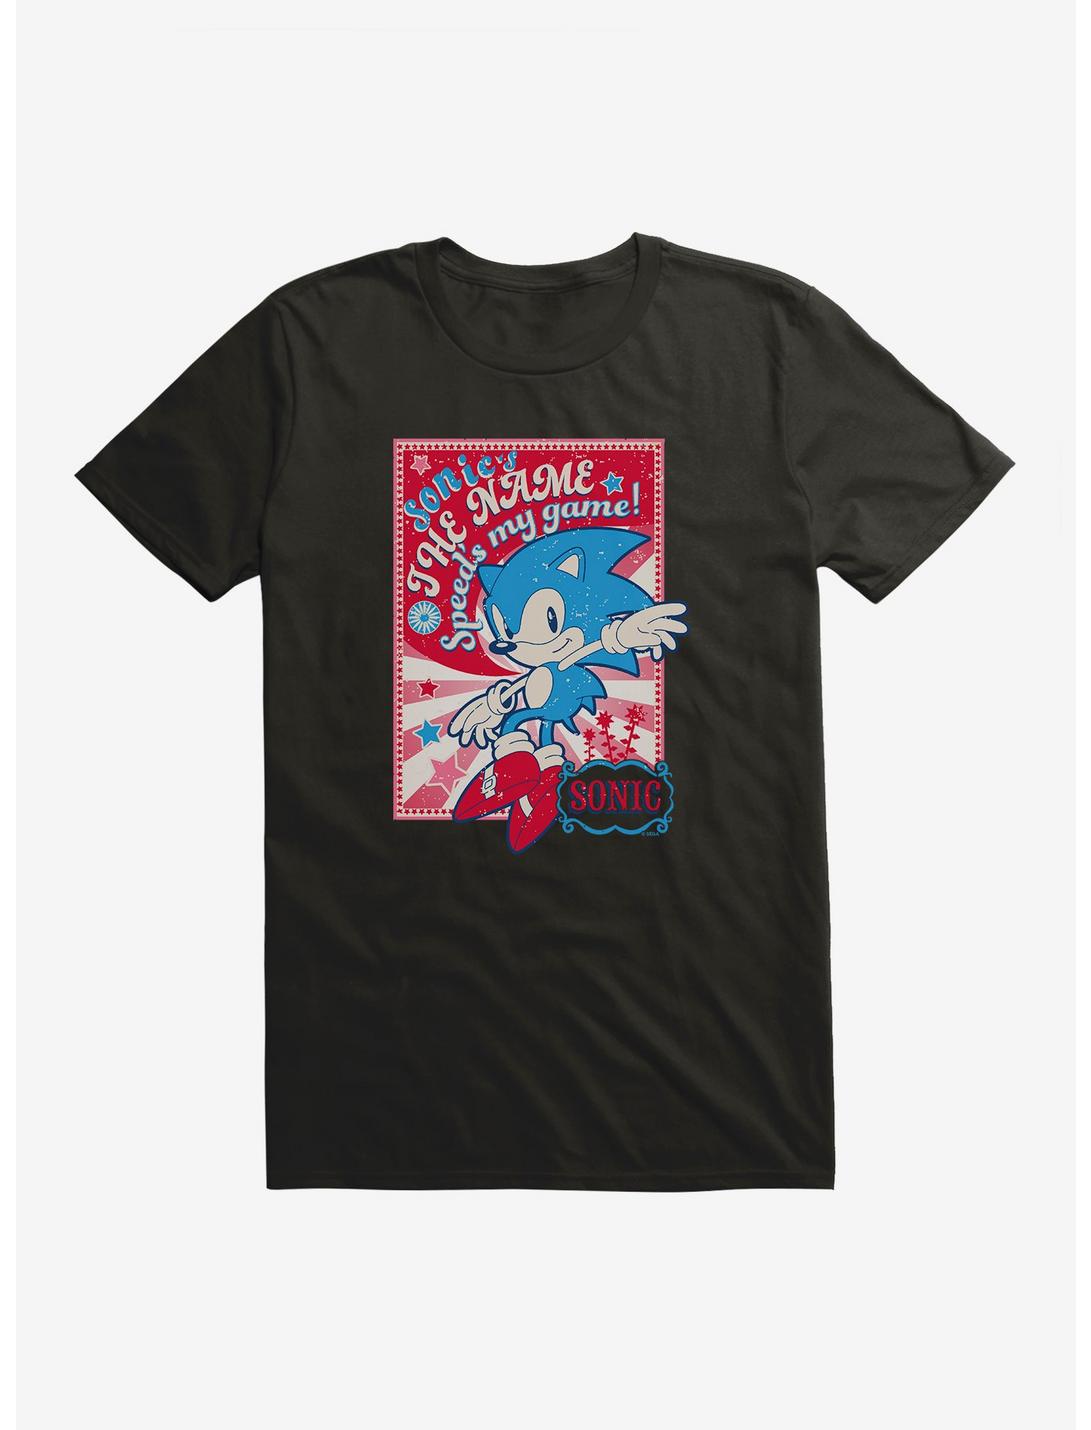 Sonic The Hedgehog Sonic's The Name T-Shirt, BLACK, hi-res